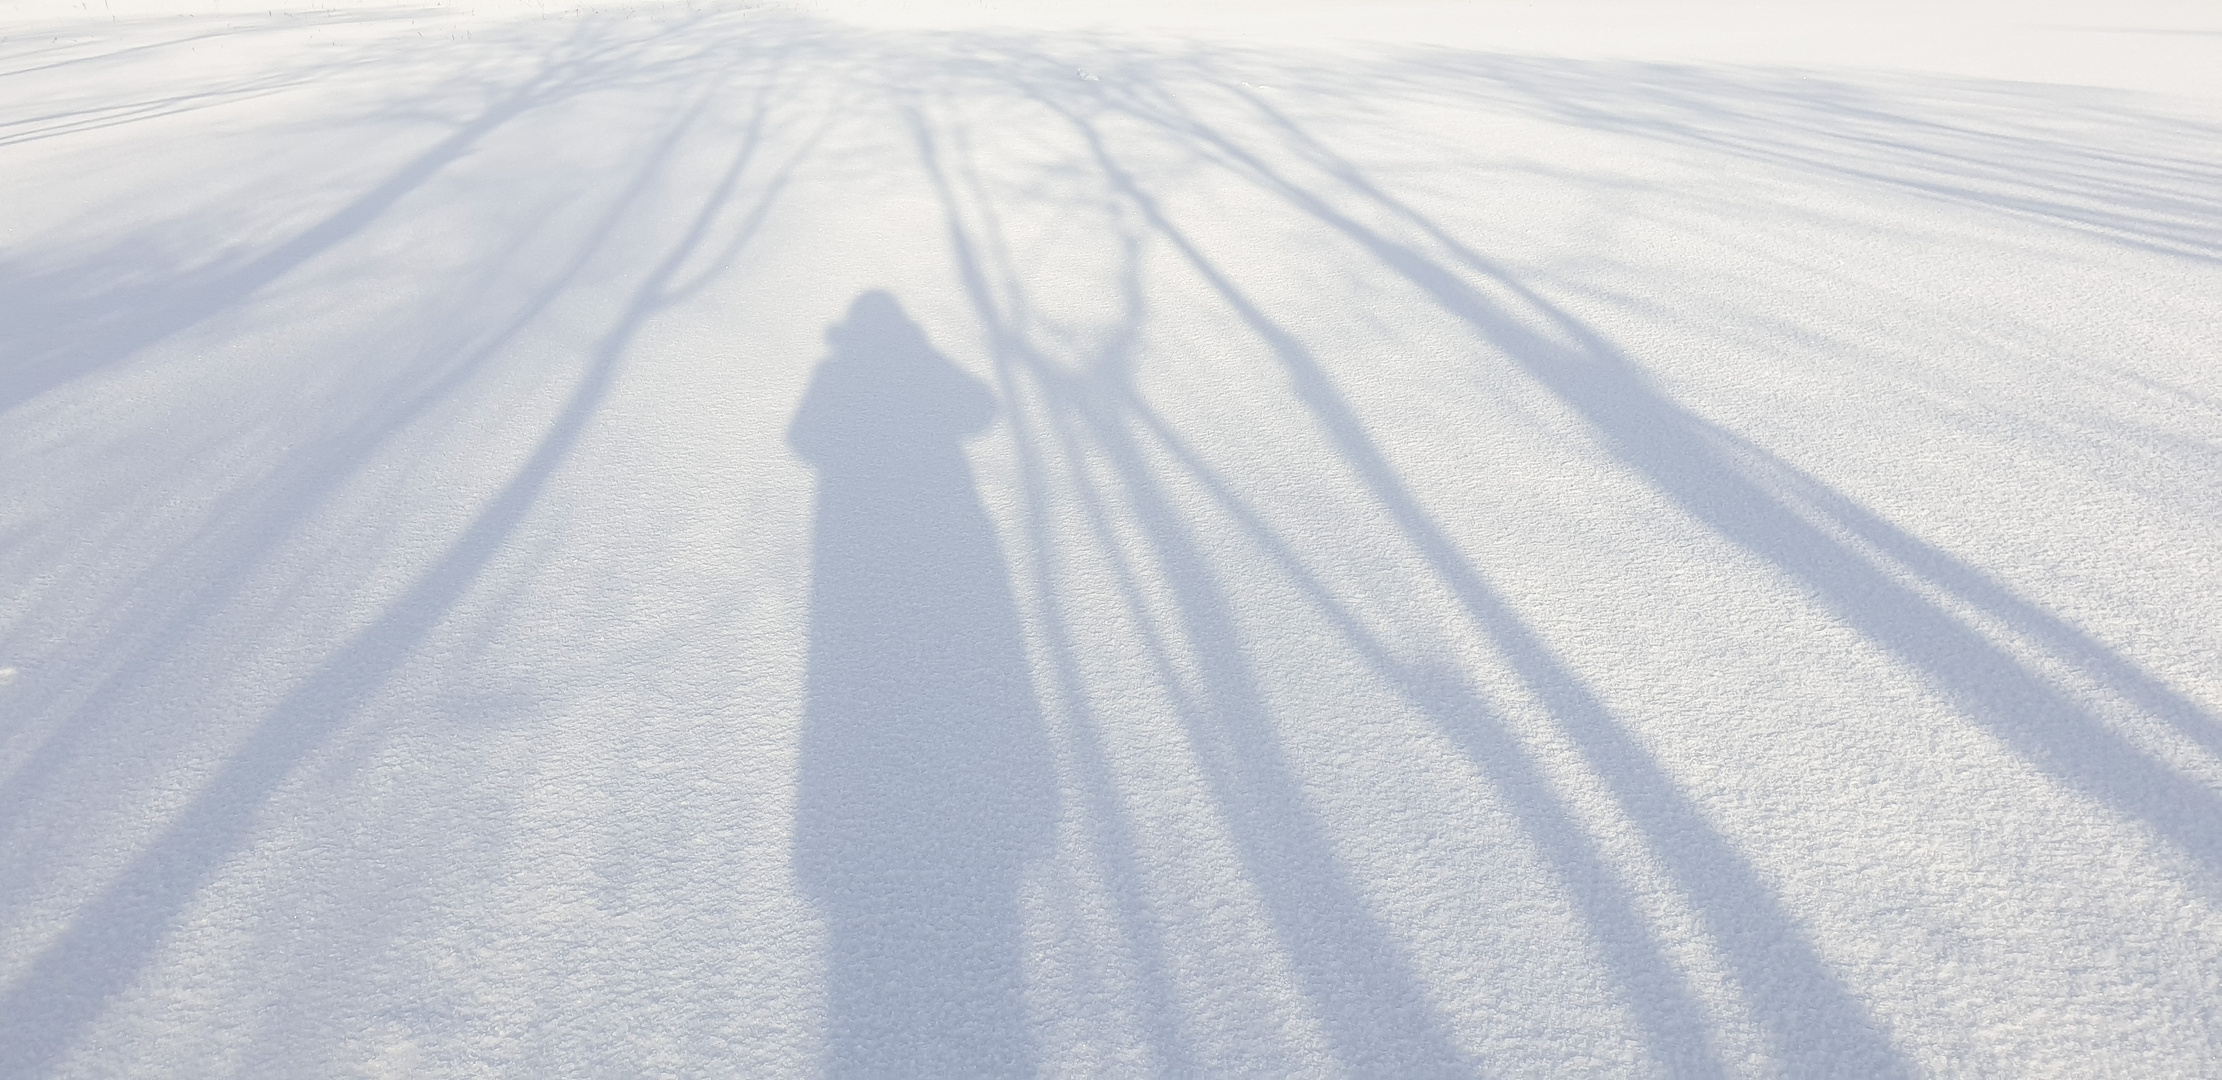 Shadow in the Snow